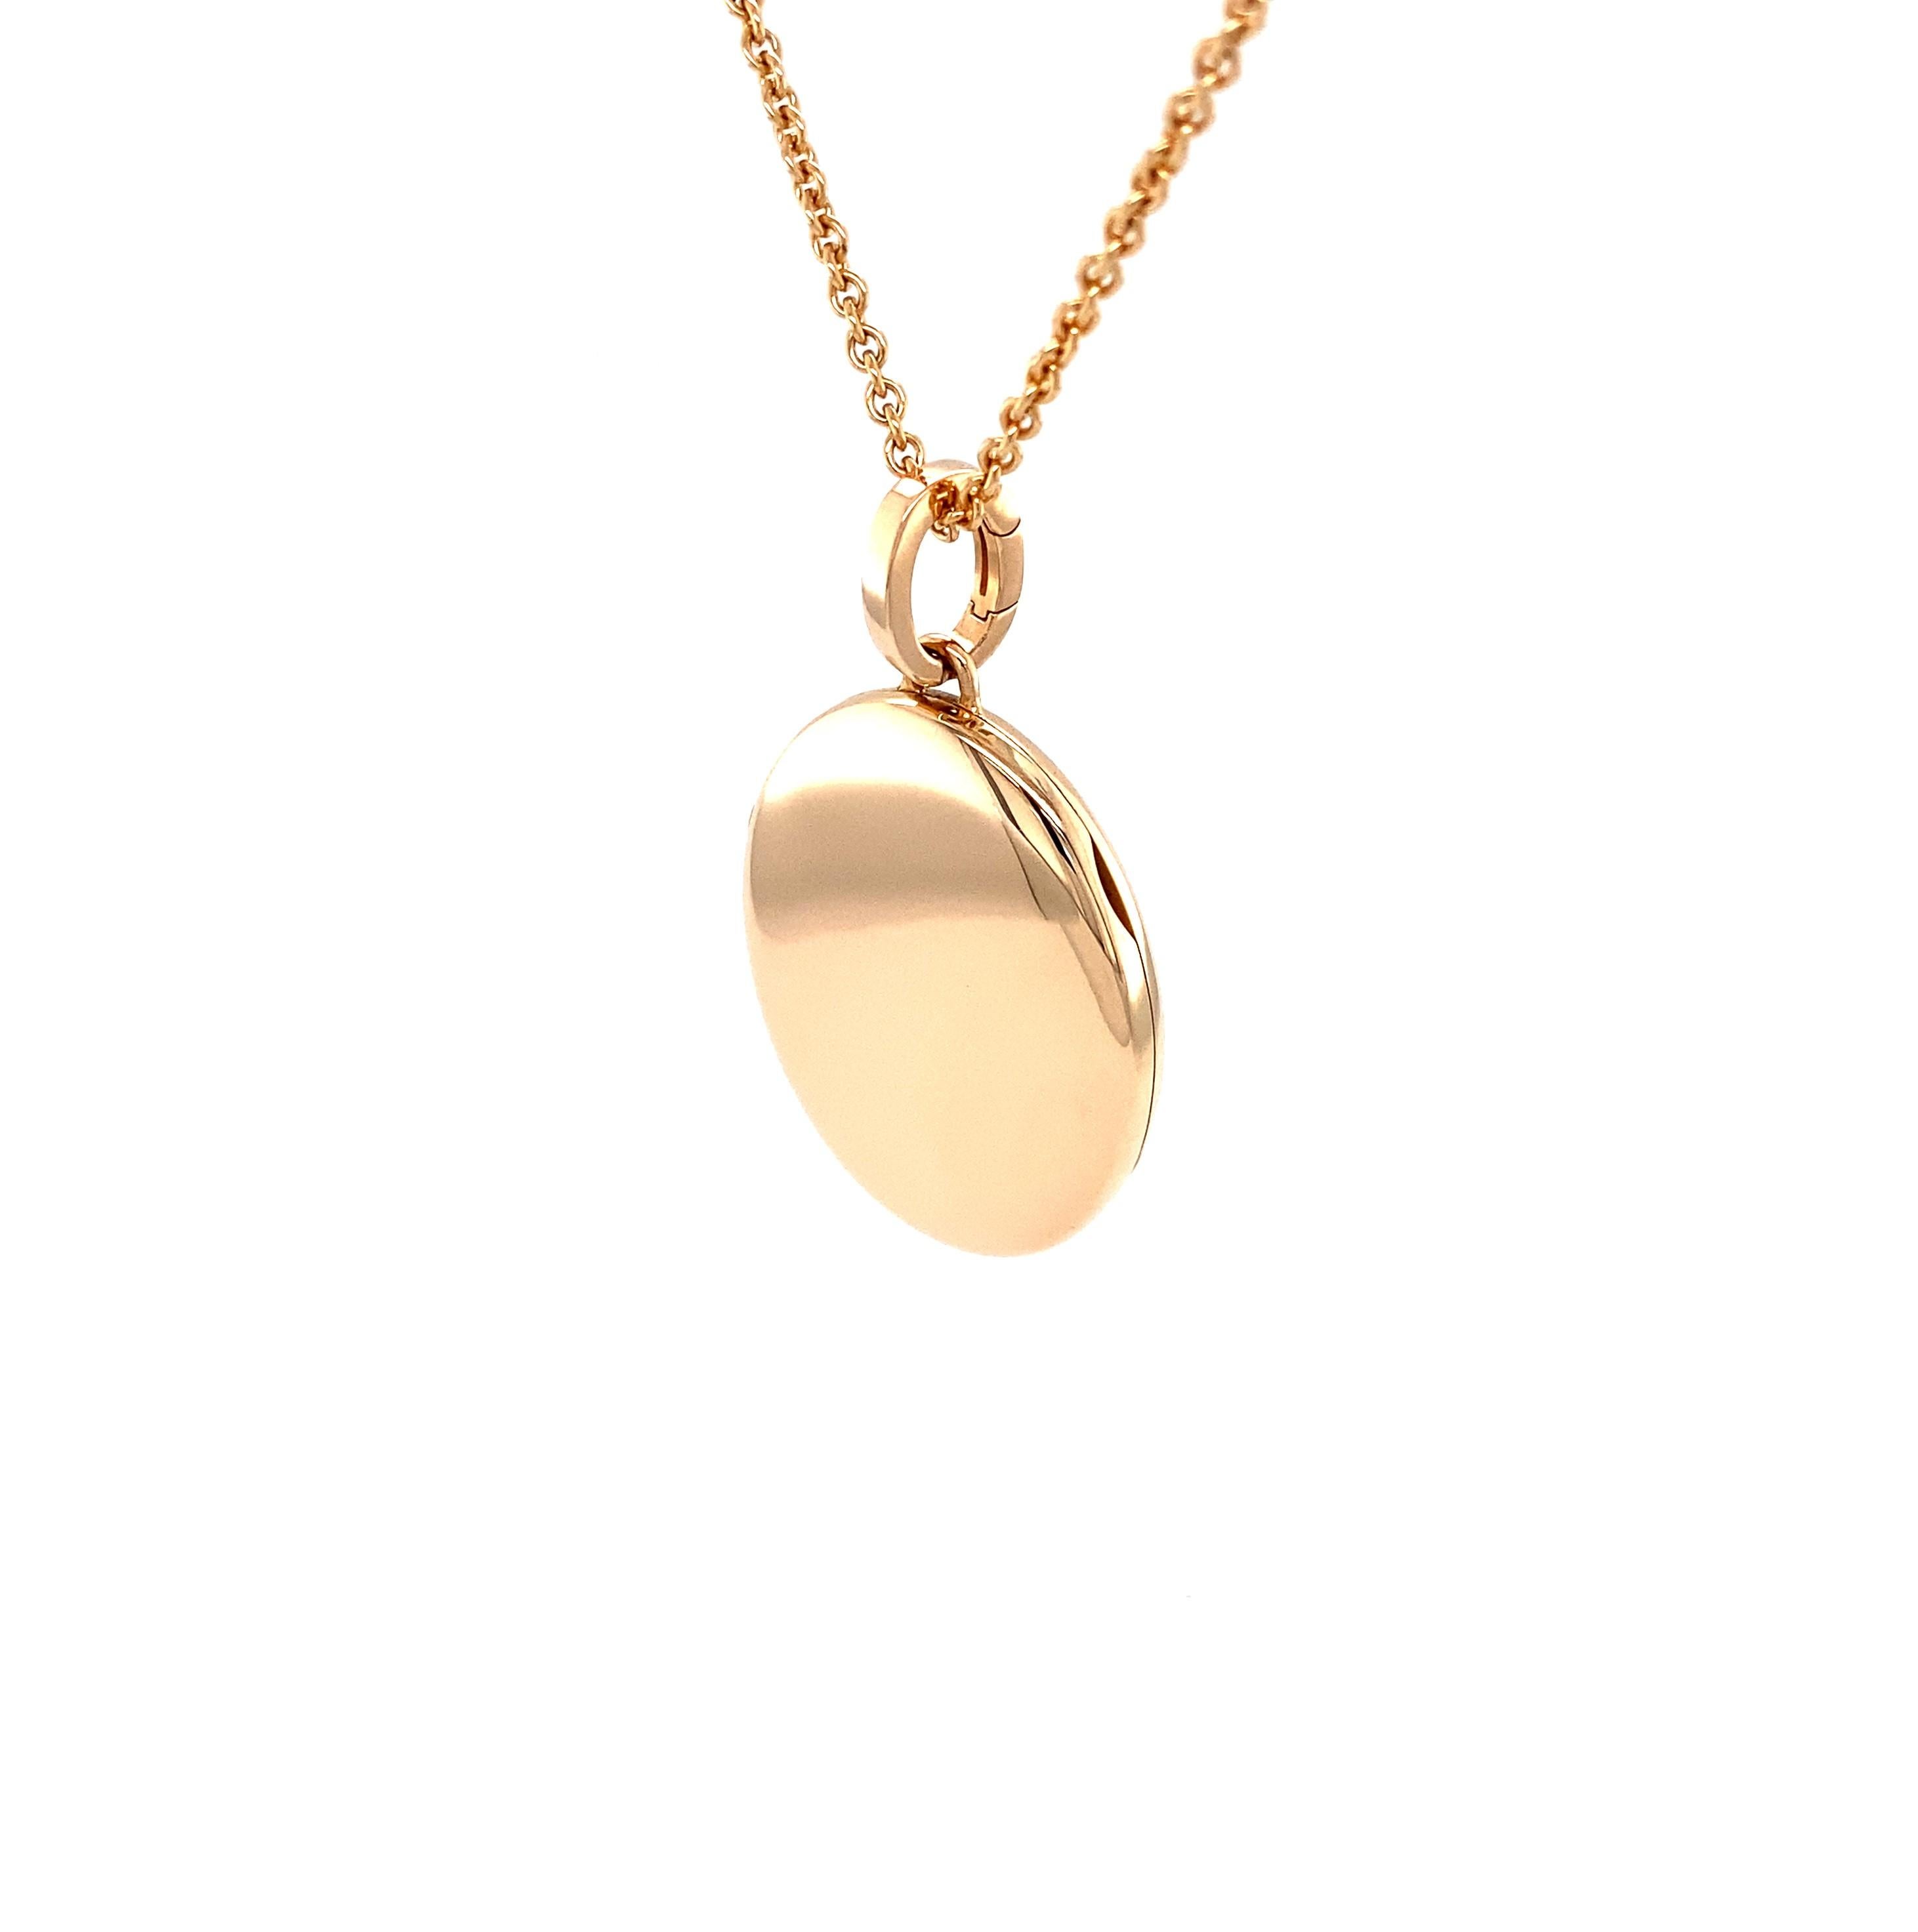 Contemporary Customizable Oval Polished Locket Pendant Necklace  - 18k Rose Gold 23.0*32.0 mm For Sale